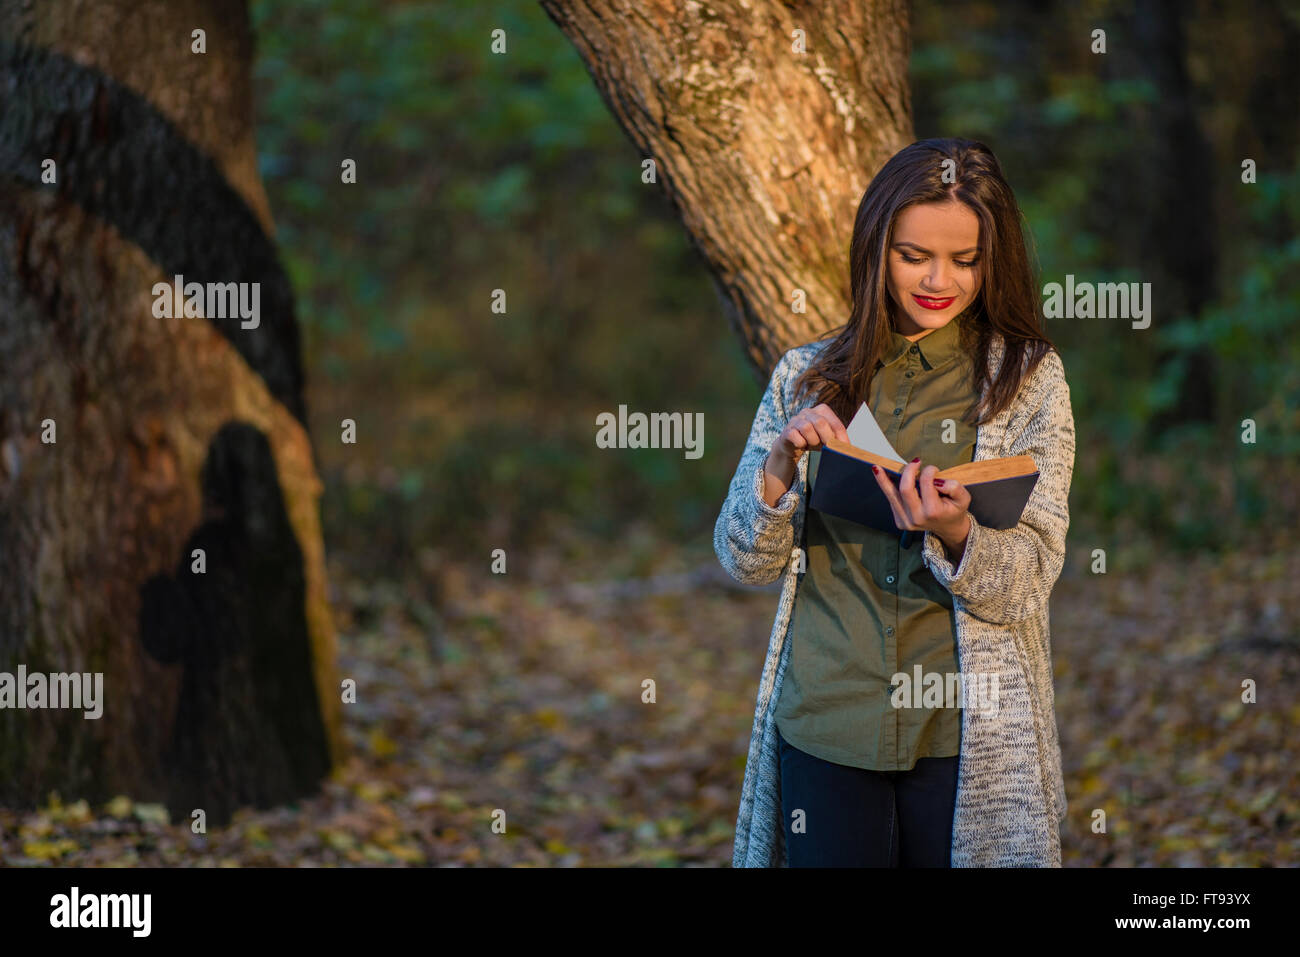 A teenager girl is reading a book in an evening forest with two oak trees in the background. She casts shadow on one of trees. Stock Photo